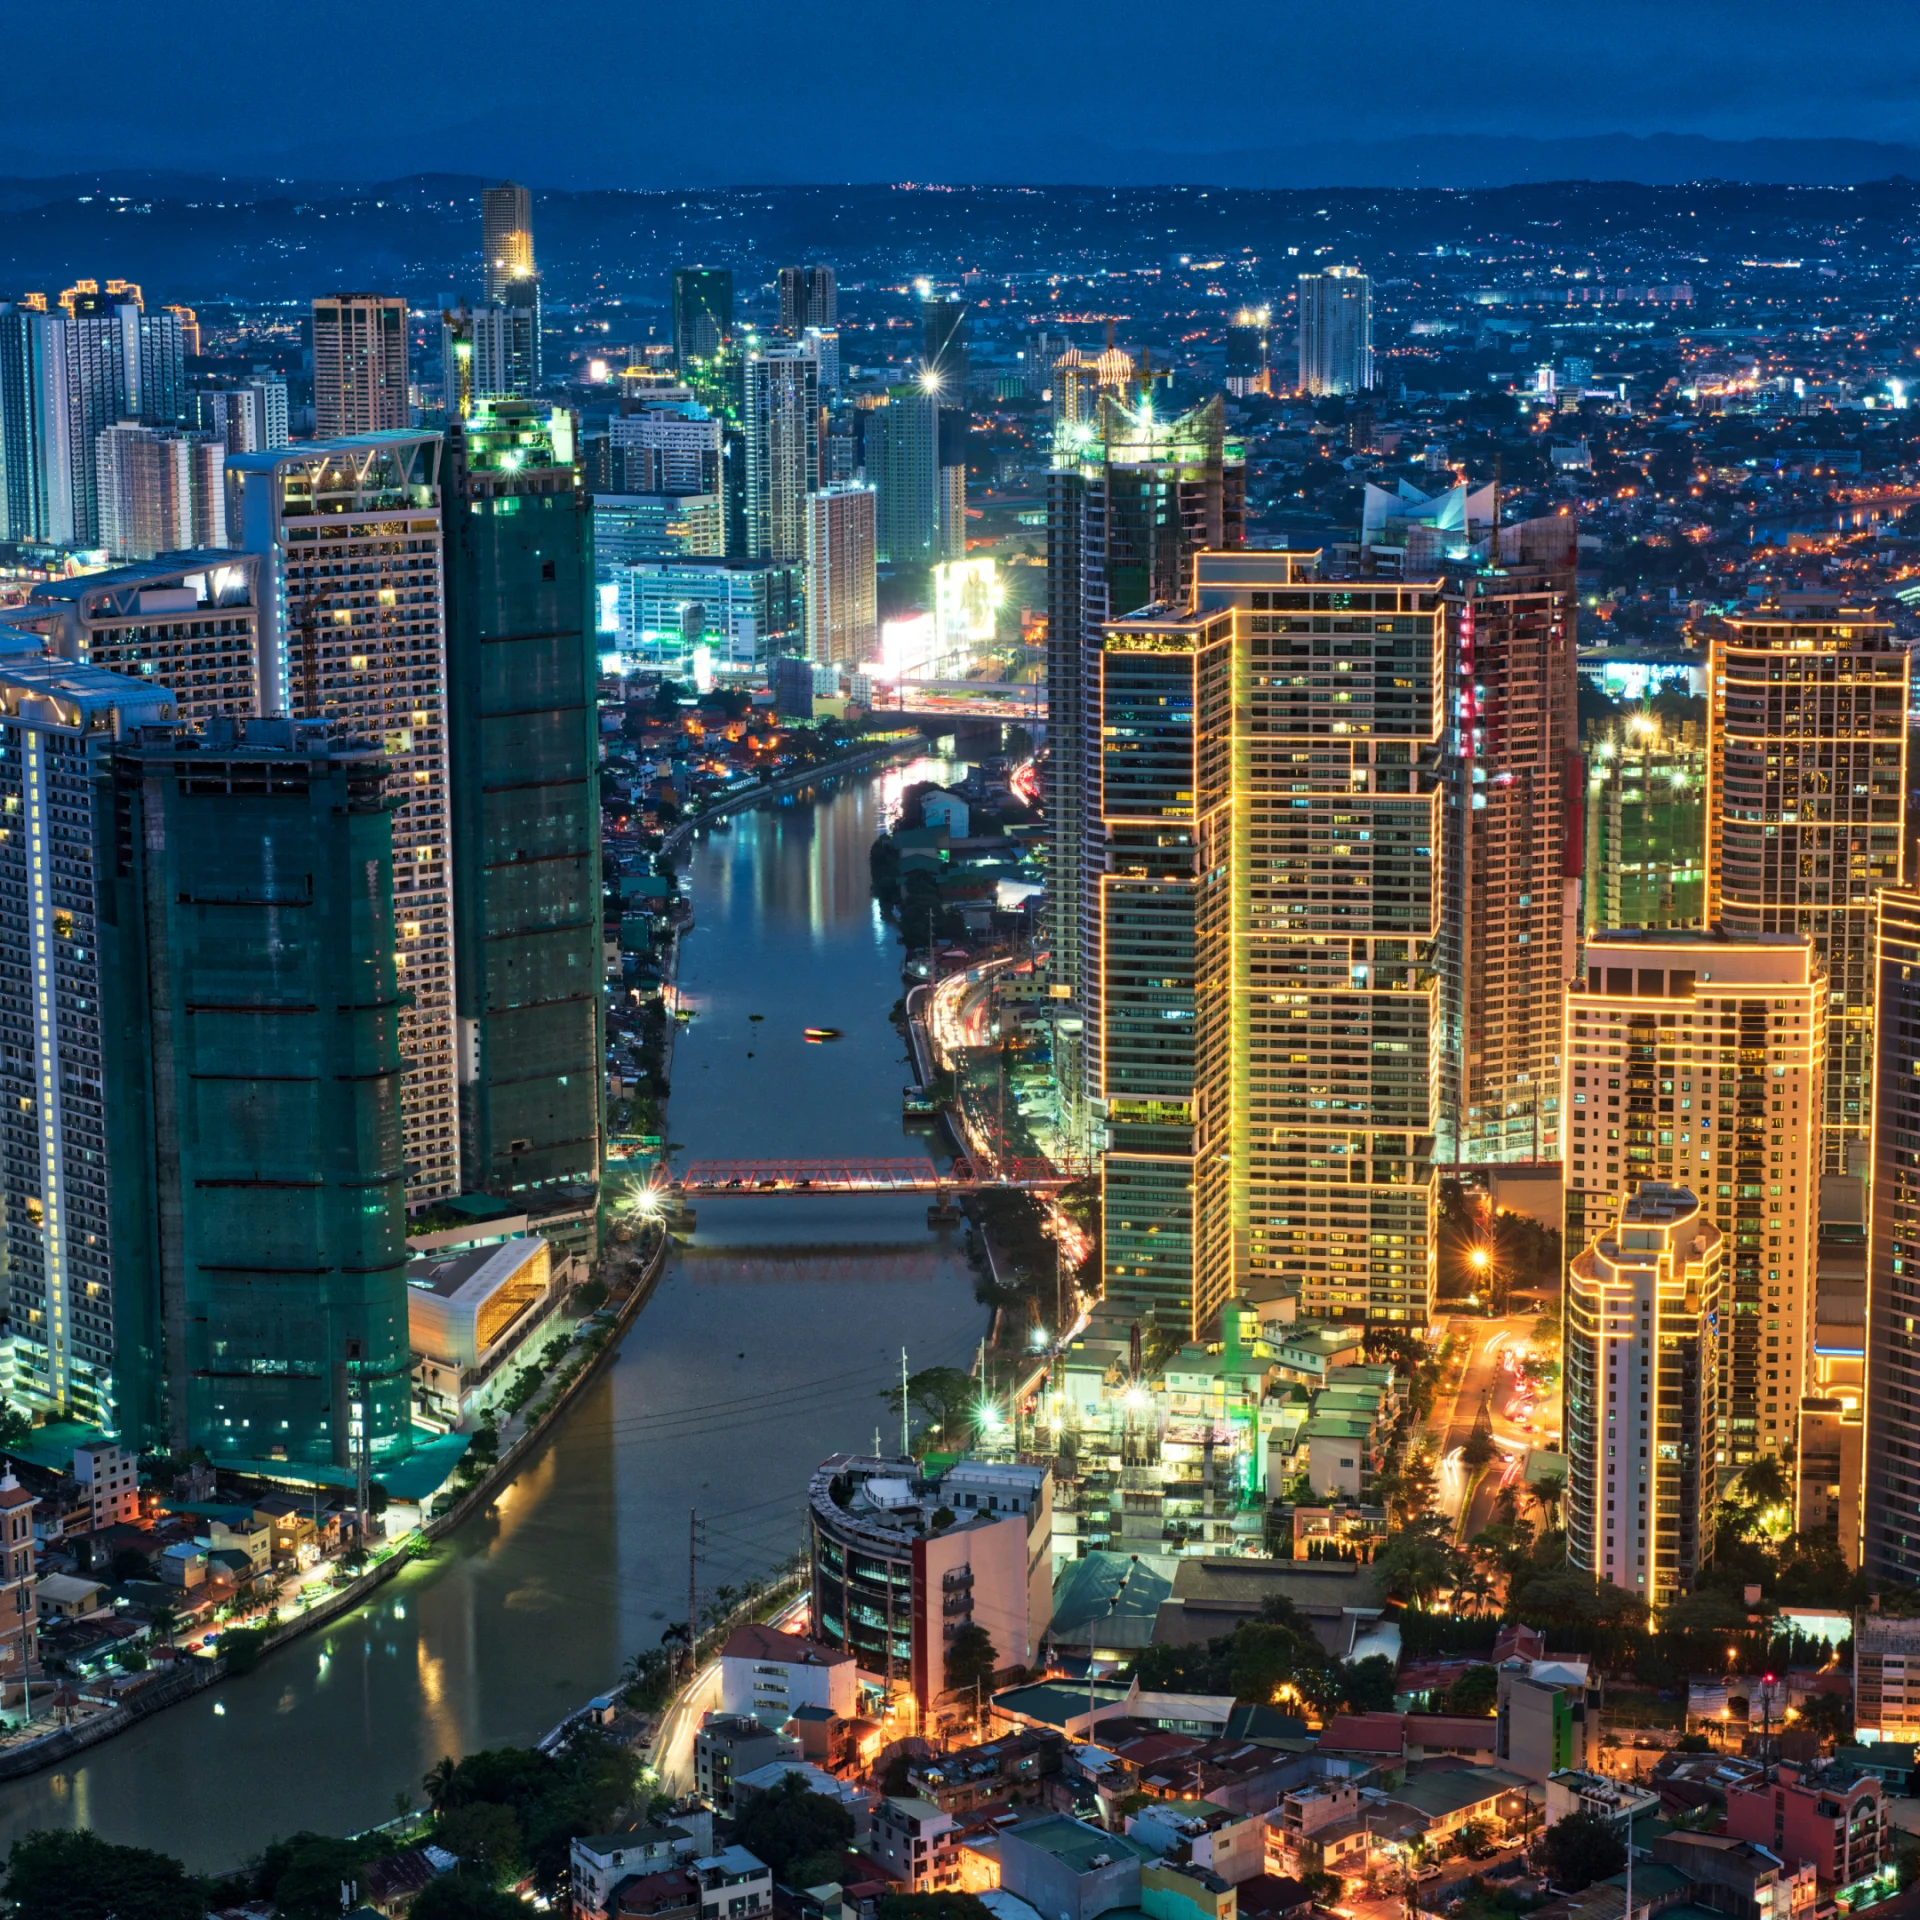 Skyline view of a city in The Philippines